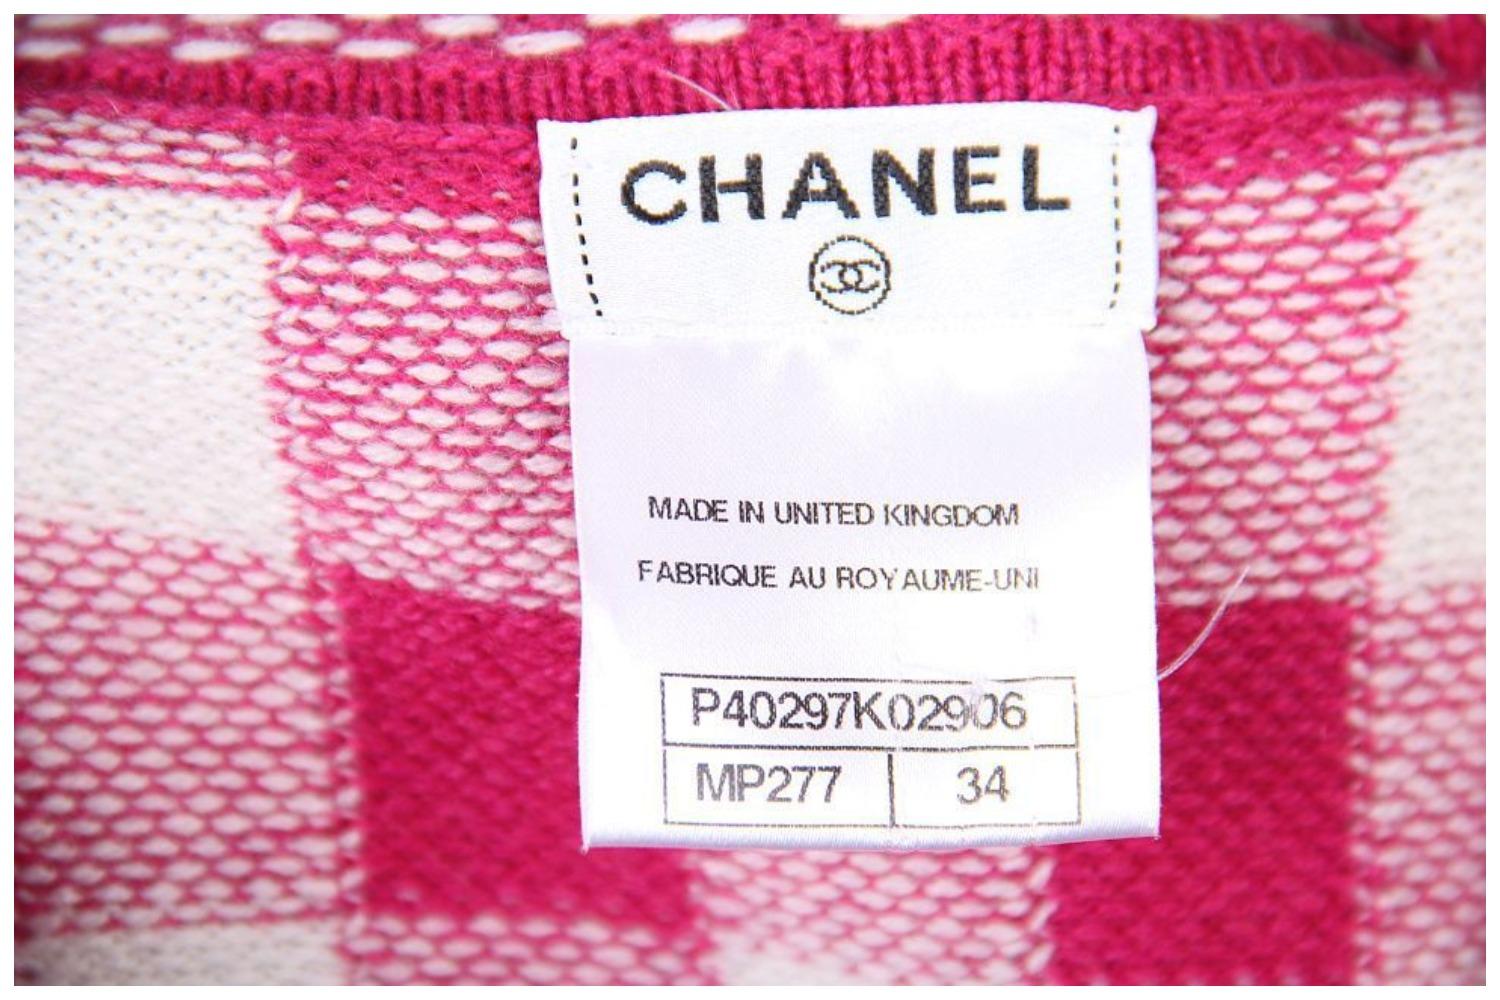 Chanel & Karl Lagerfeld 11C 2011 cruise cashmere t-shirt  top Barbie style For Sale 4